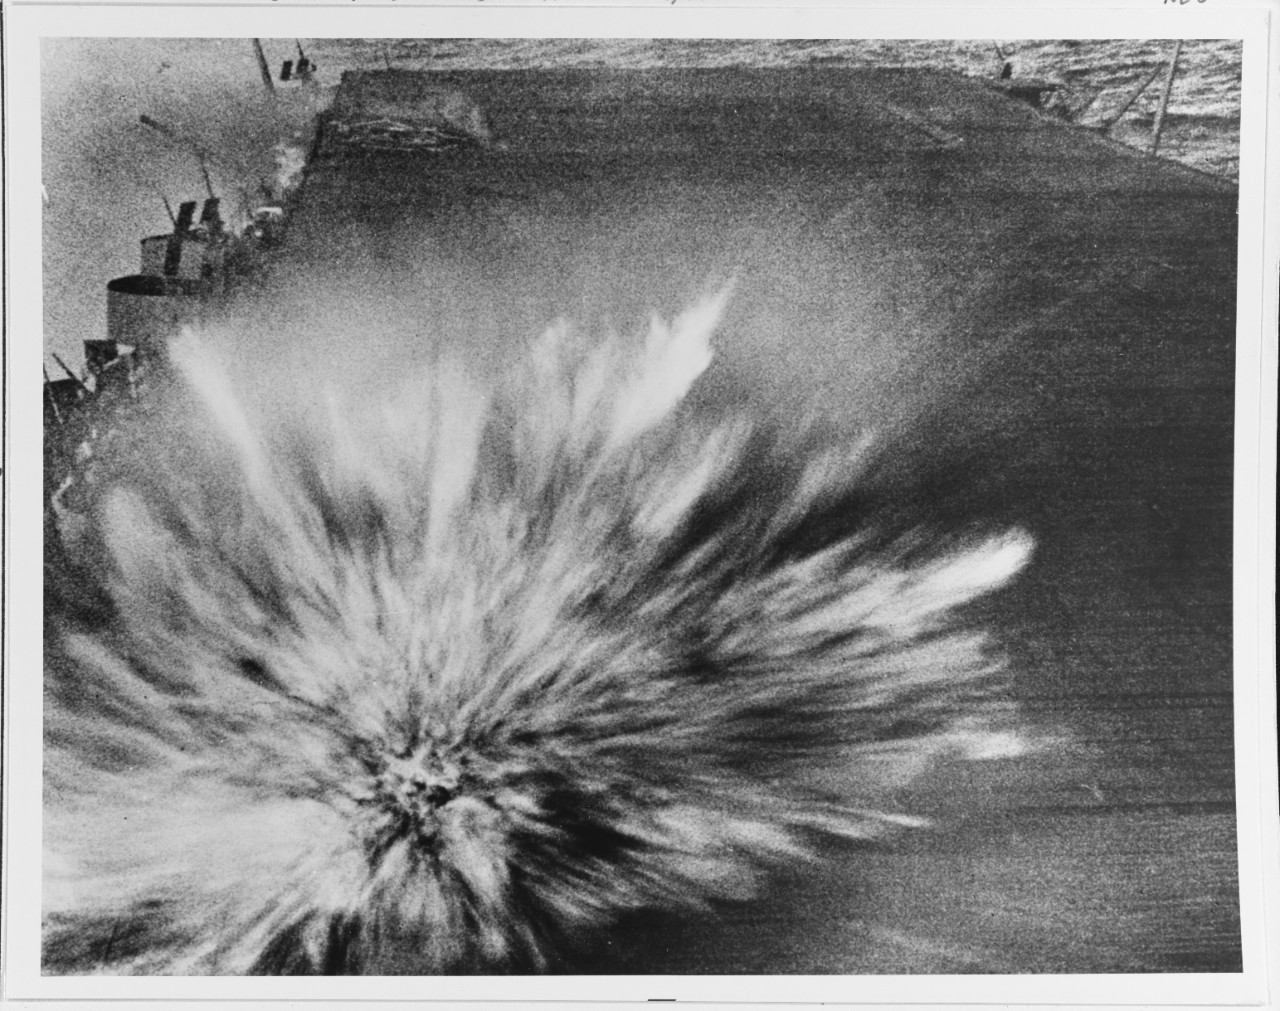 Battle of the Eastern Solomons, August 1942 A Japanese bomb exploding on the flight deck of USS Enterprise (CV-6), just aft of the island, on 24 August 1942. : According to the original photo caption, this explosion killed the photographer, Photographer's Mate 3rd Class Robert F. Read. However, Morison's History of U.S. Naval Operations in World War II (volume 5, page 97) states that Read was killed by the bomb that had earlier hit the after starboard 5/38 gun gallery, which can be seen burning in the upper left. Morison further states that the bomb seen here exploded with a low order detonation, inflicting only minor damage. Official U.S. Navy Photograph, now in the collections of the National Archives.